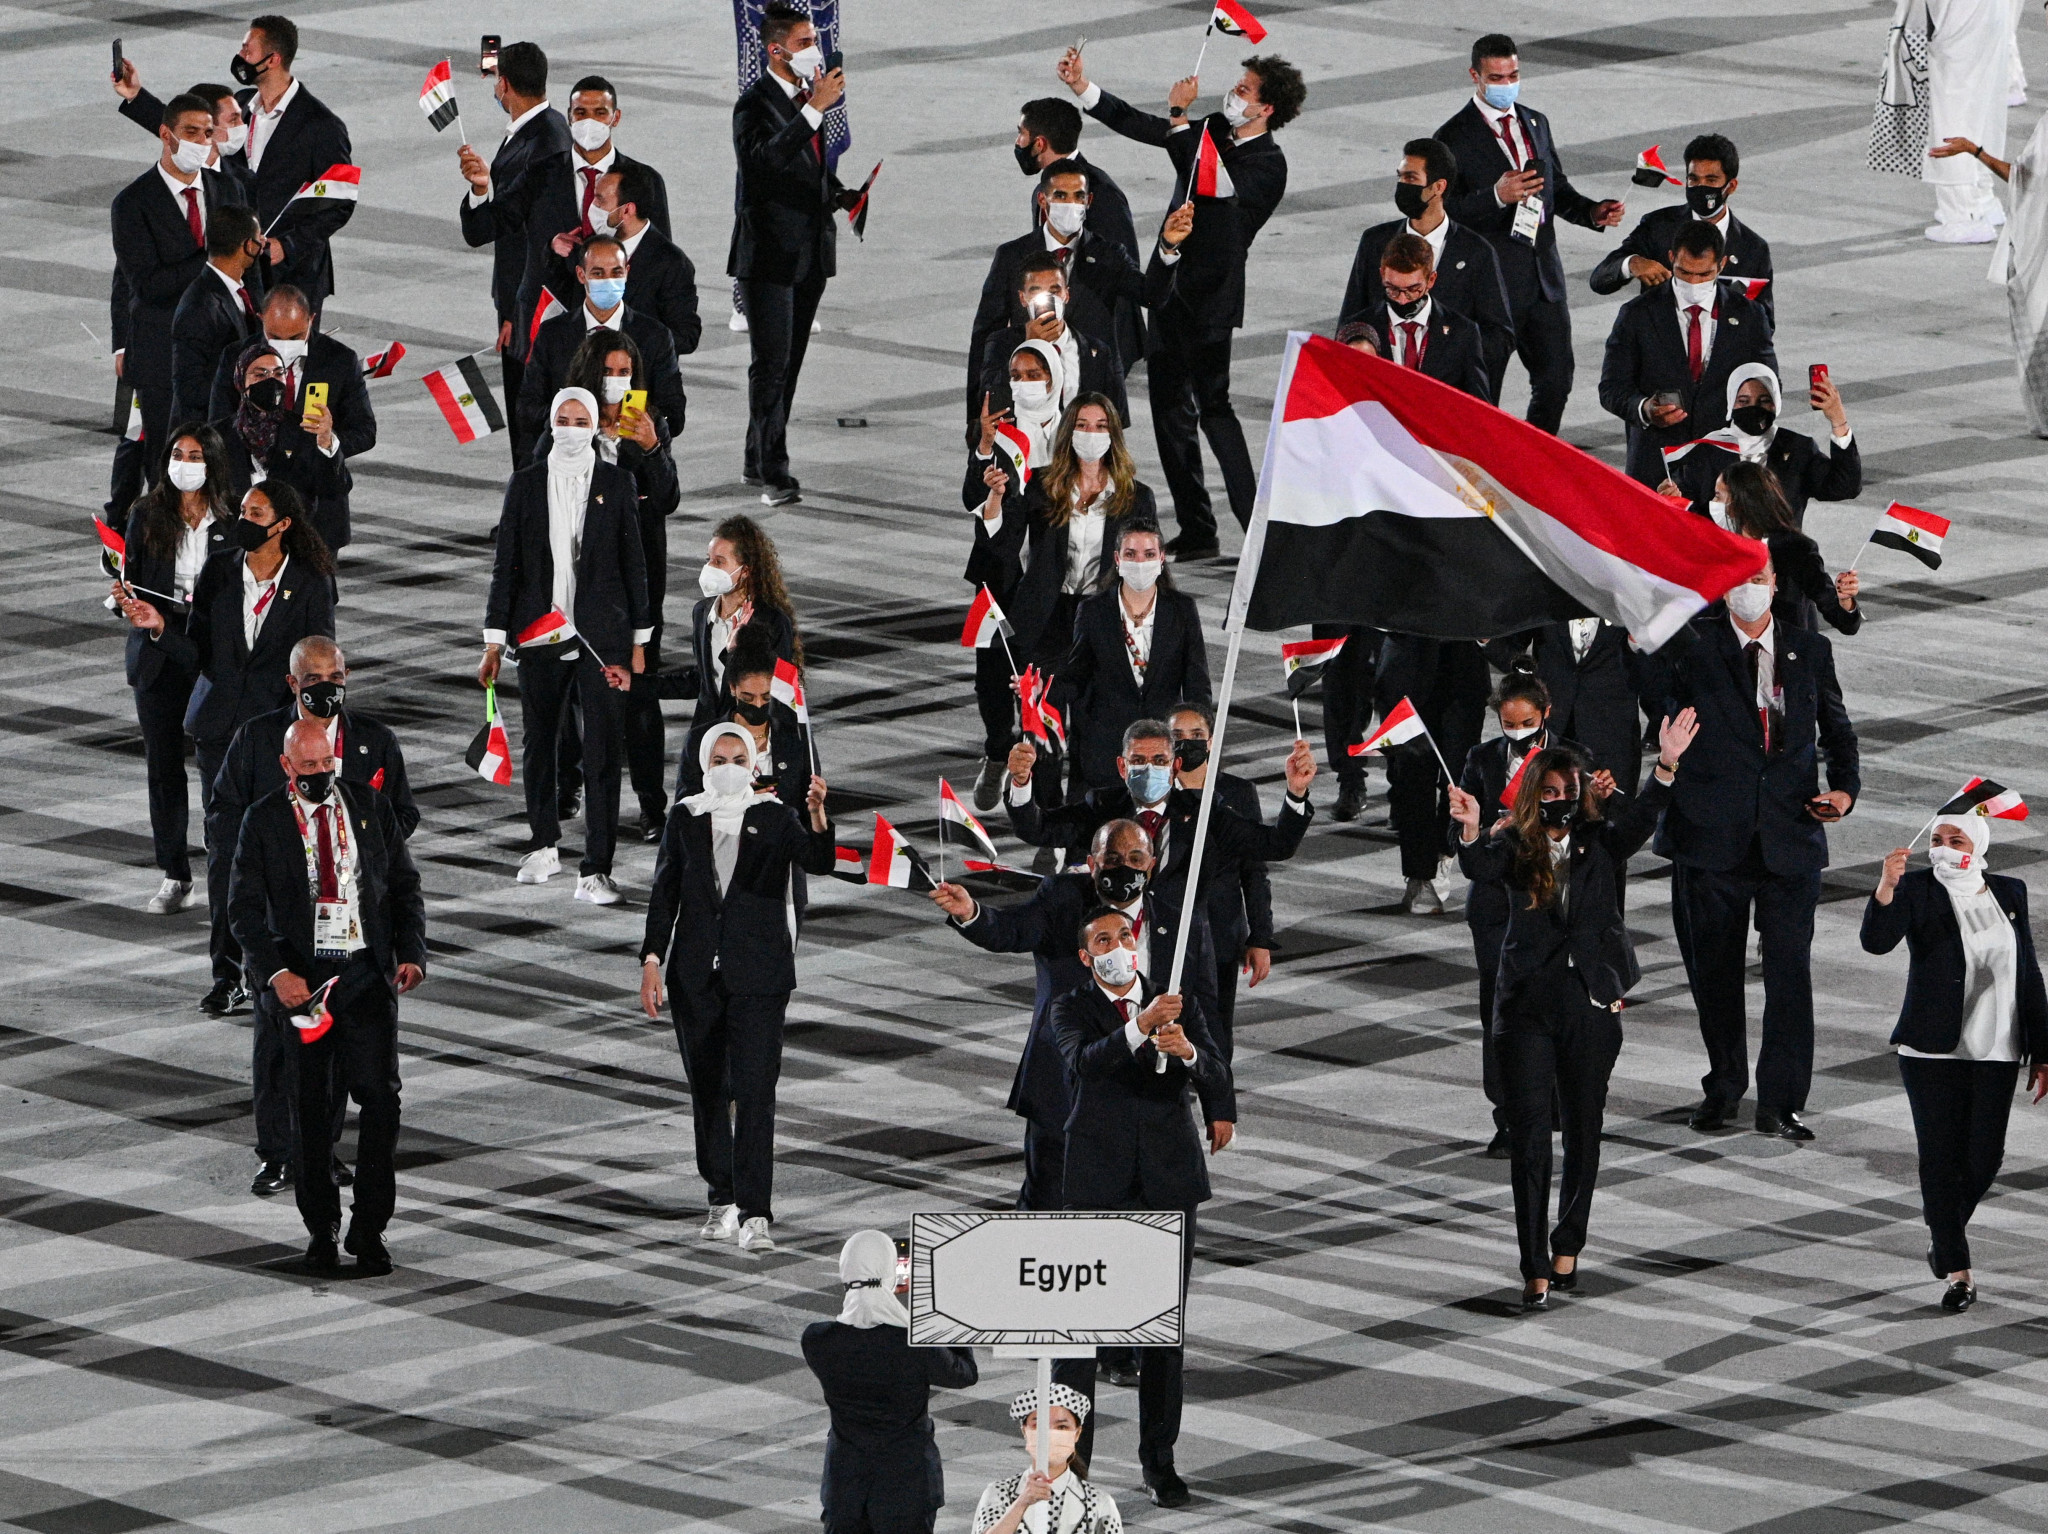 Egyptian Sports Minister reveals plan to bid for 2036 Olympic Games